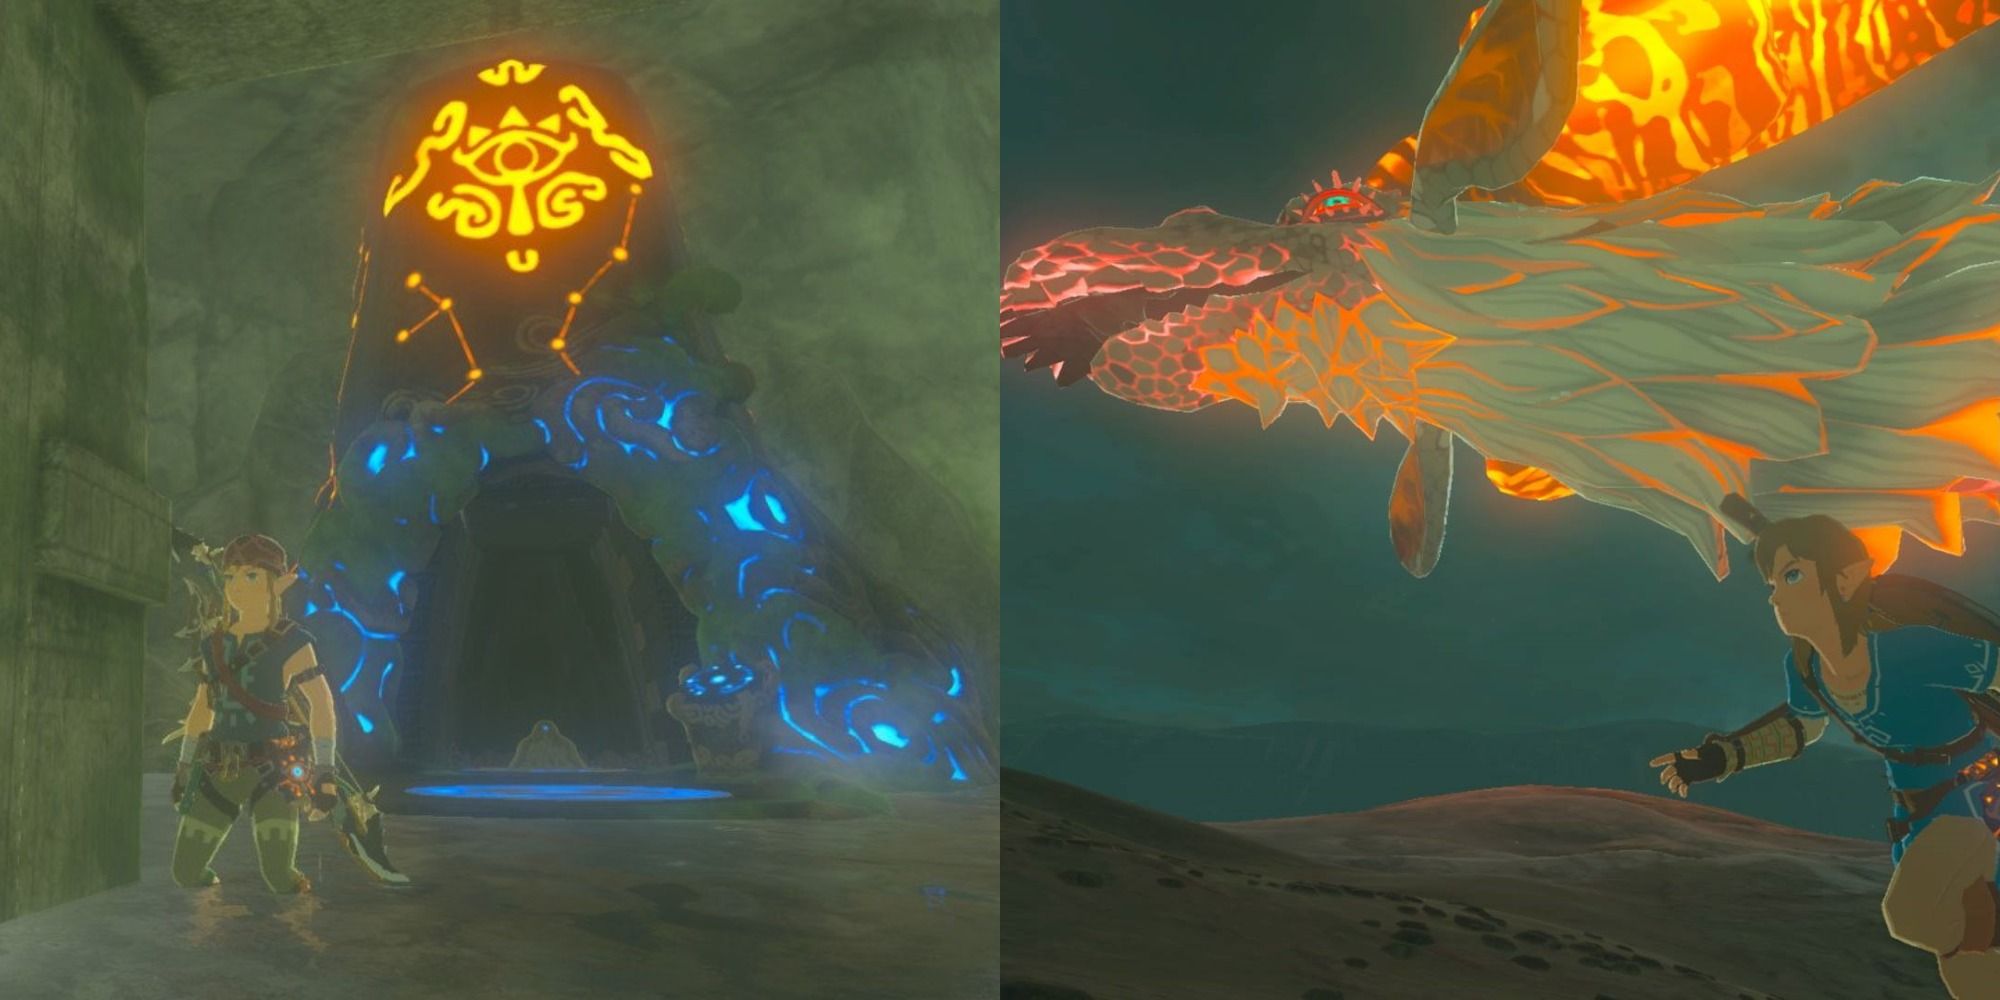 Split image: The entrance to the Shrine of Power in